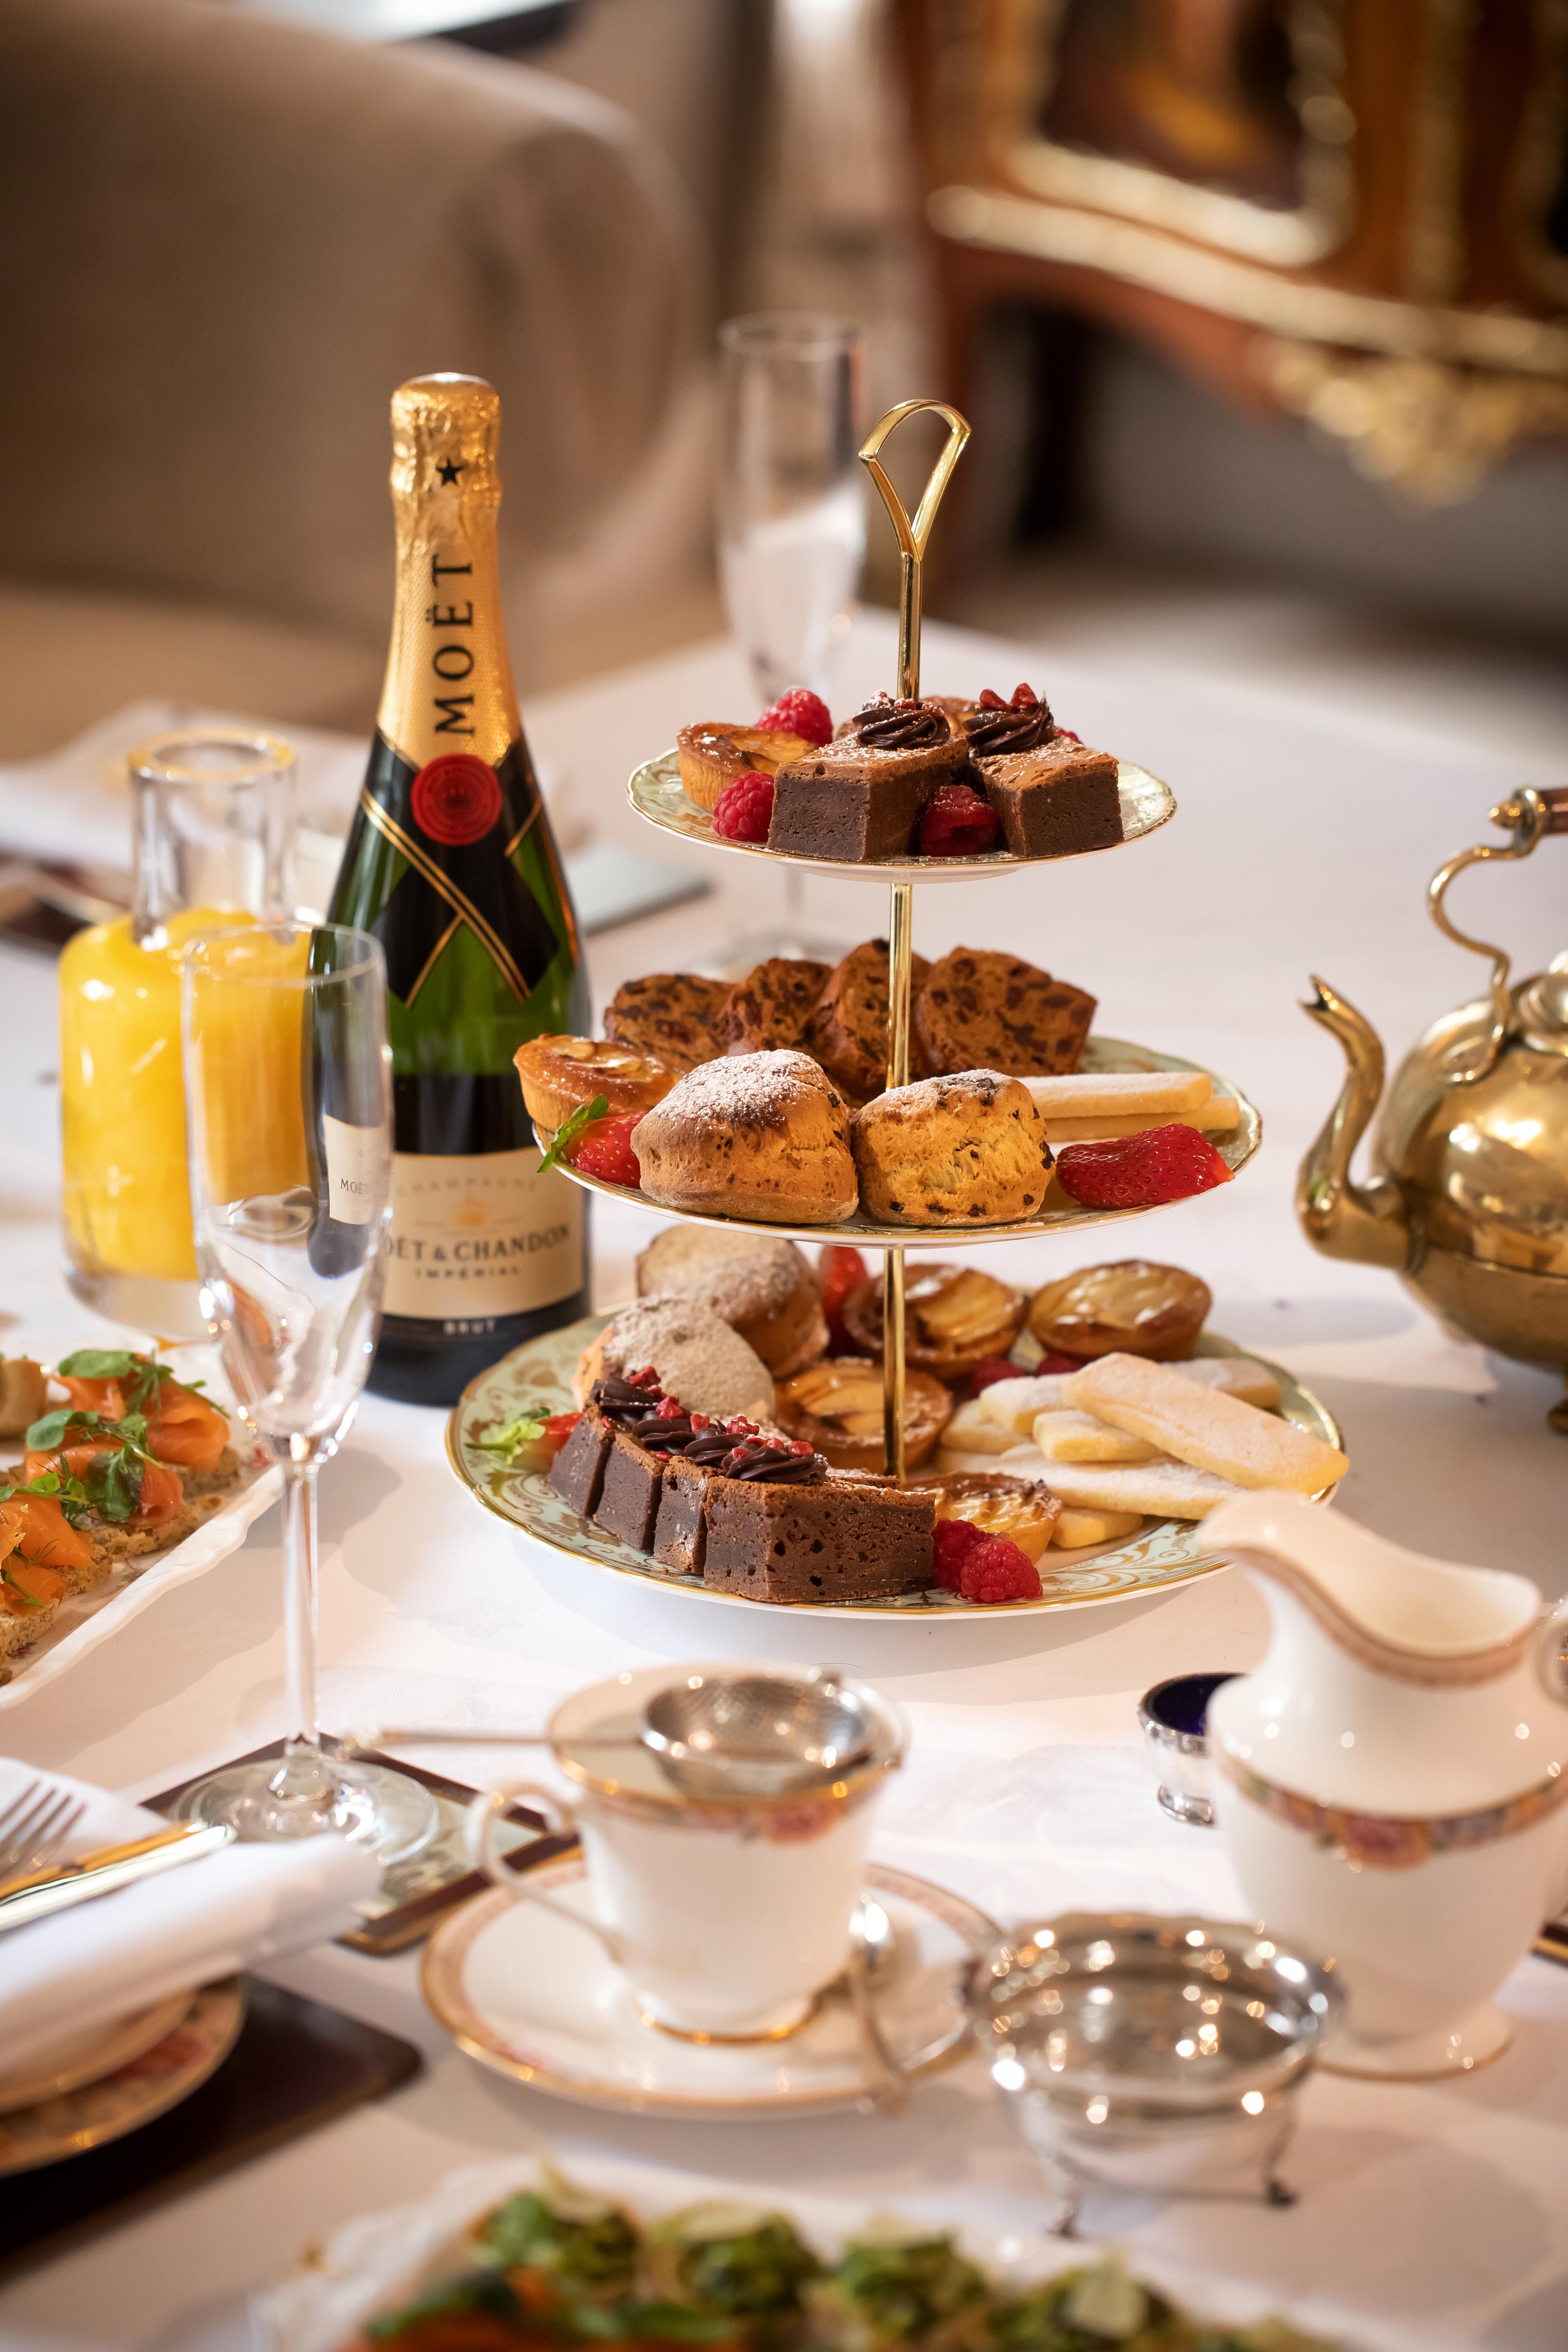 Fitzers Catering's Nurish High Sea Afternoon Tea €40 per person or €70 for 2 people

To order call 01-4663005    www.nurish.ie

For further information and photography please contact Mari O'Leary marioleary@olearypr.ie 01-6789888